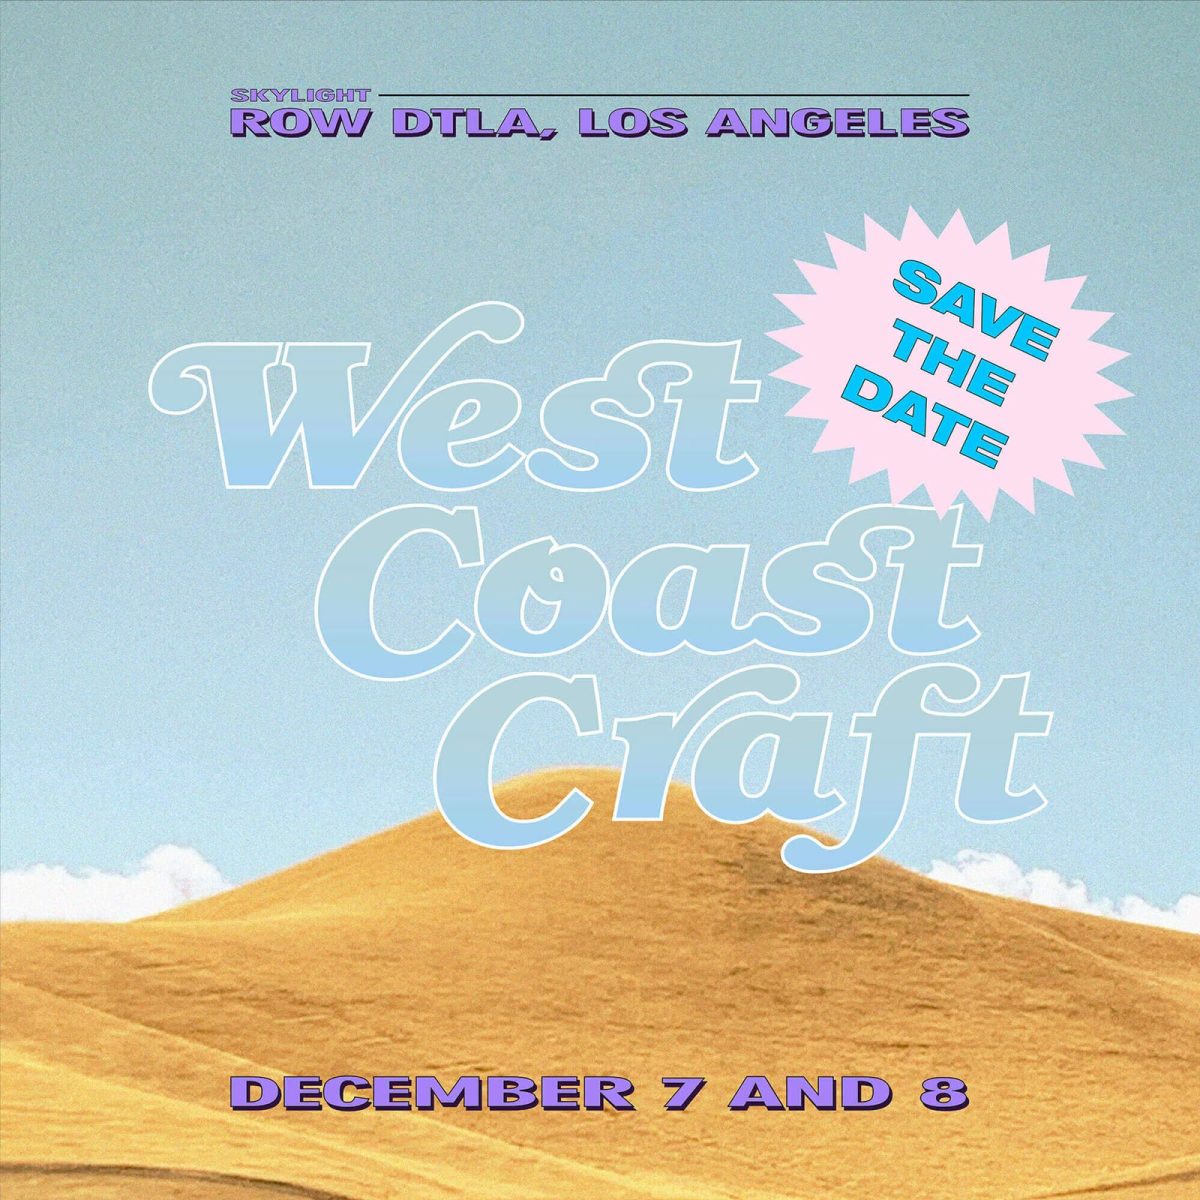 graphic poster of west coast craft los angeles fair featuring artists and designers